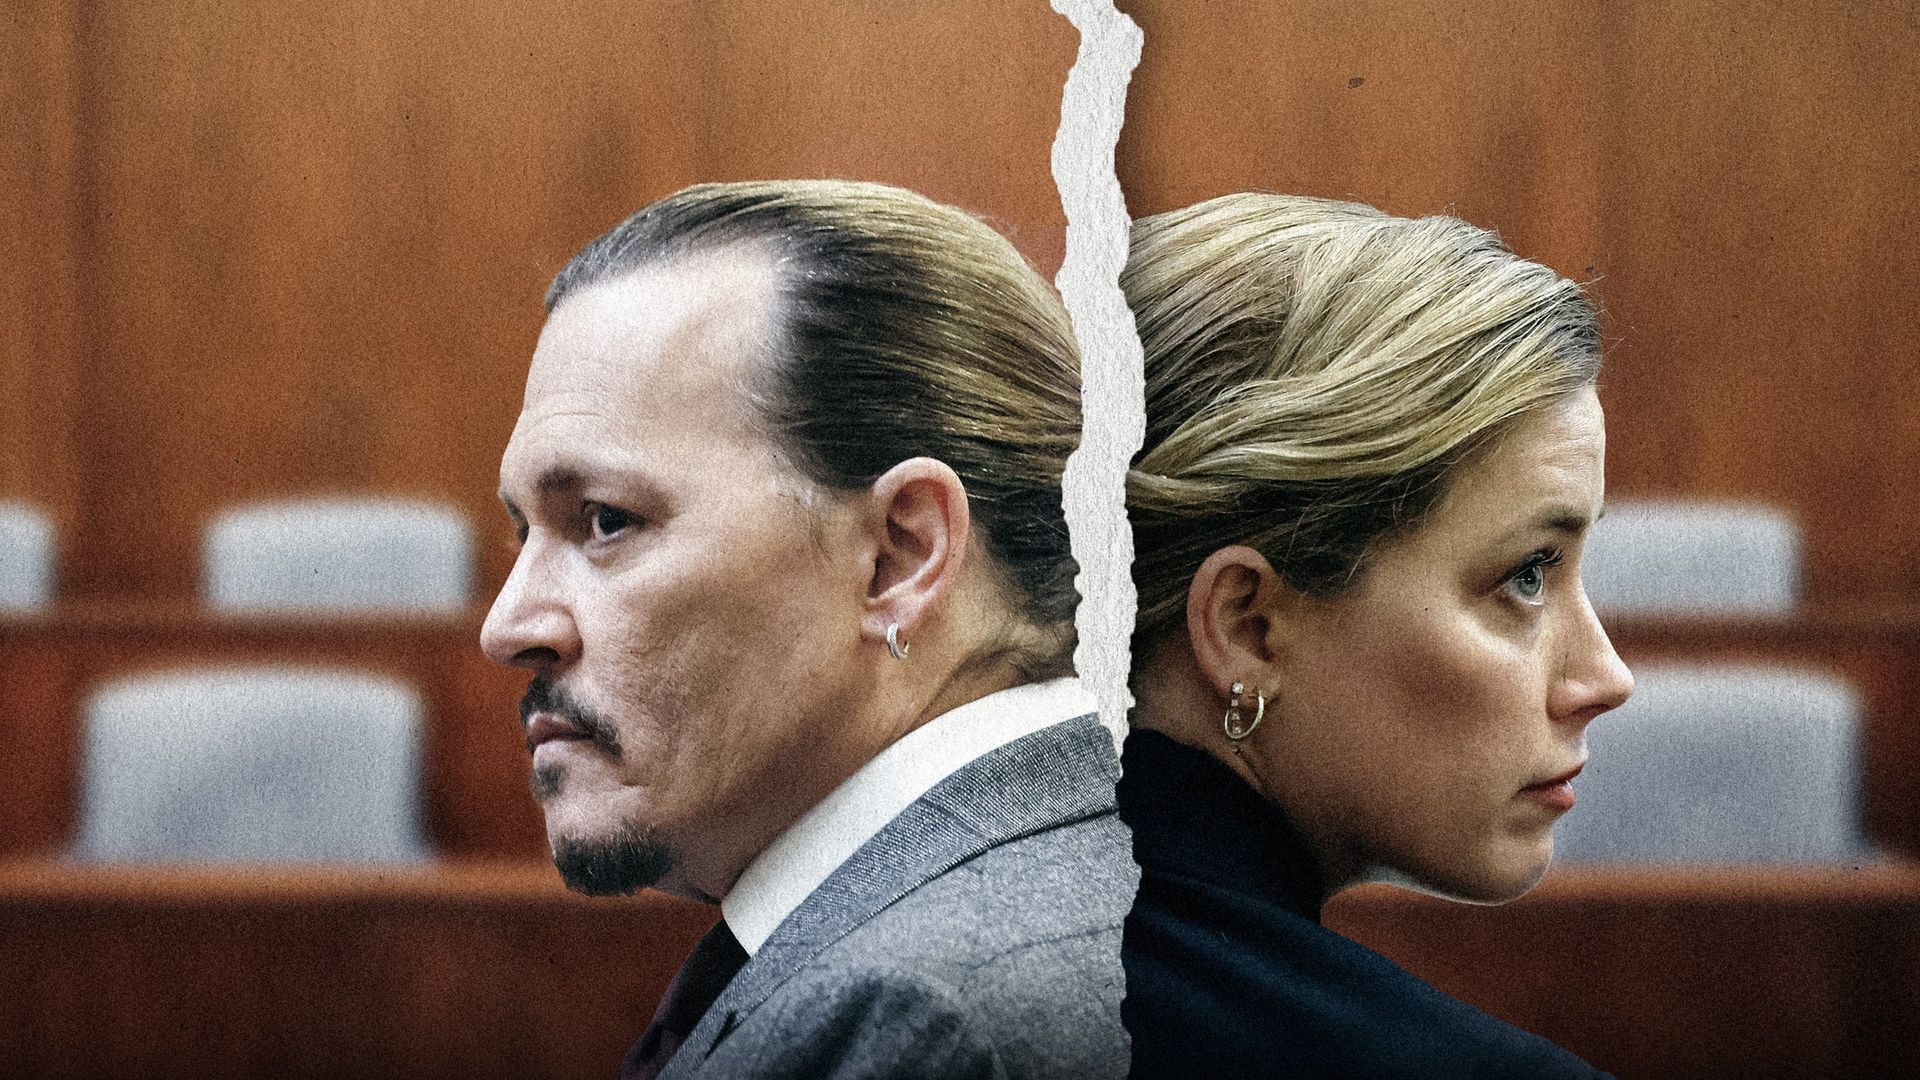 Johnny vs Amber: The U.S. Trial background